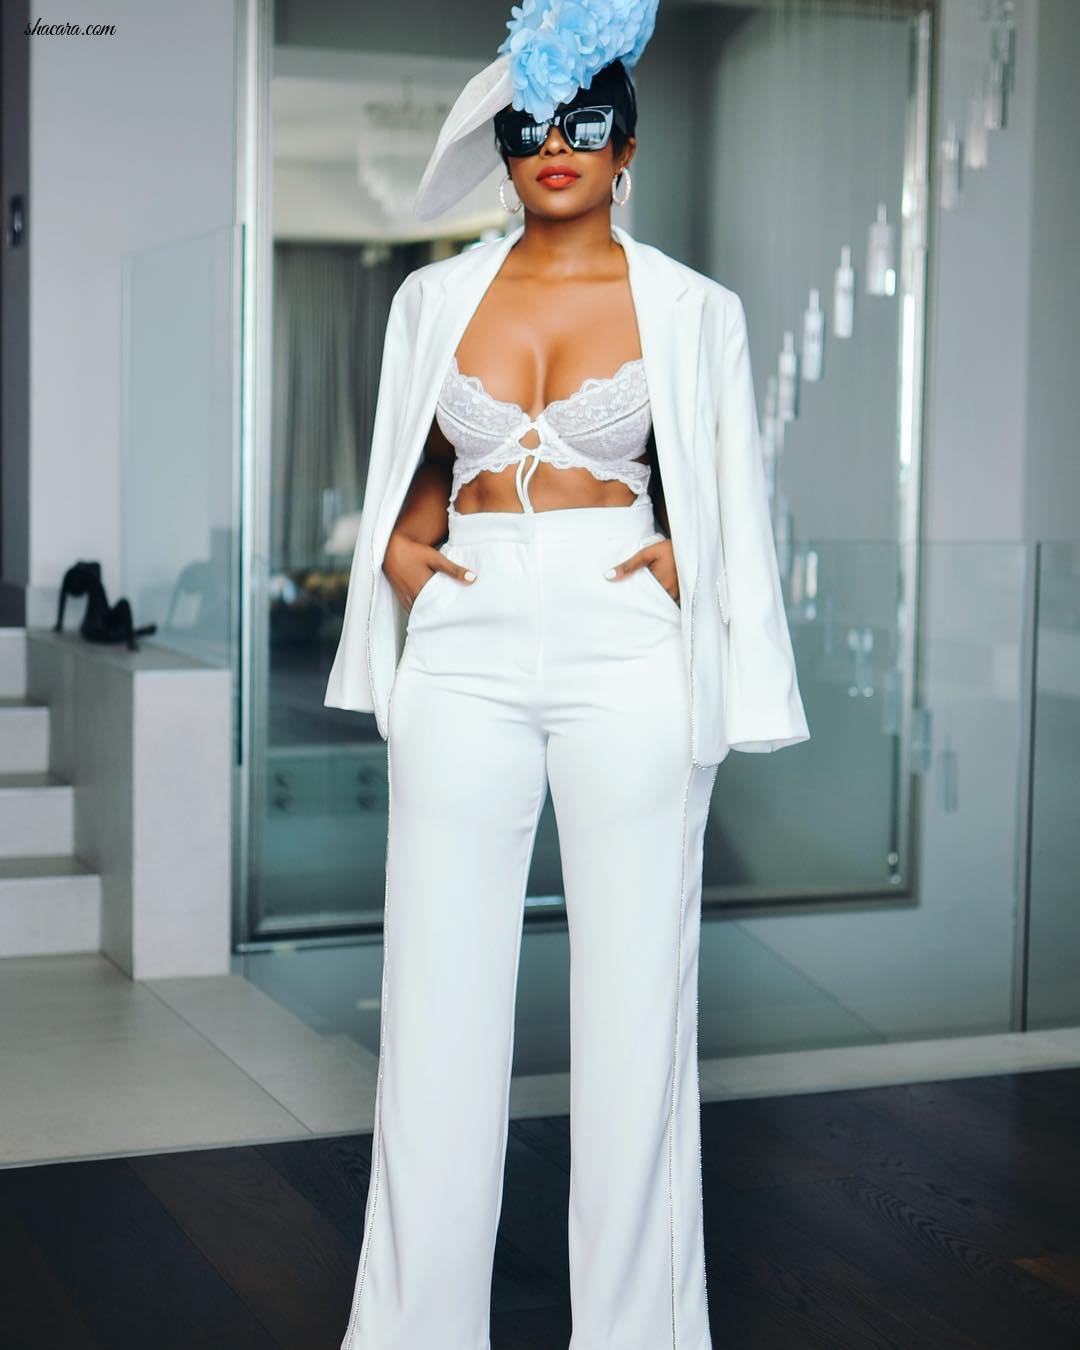 We’re Obsessing Over Nomzamo Mbatha’s Killer All-White Look